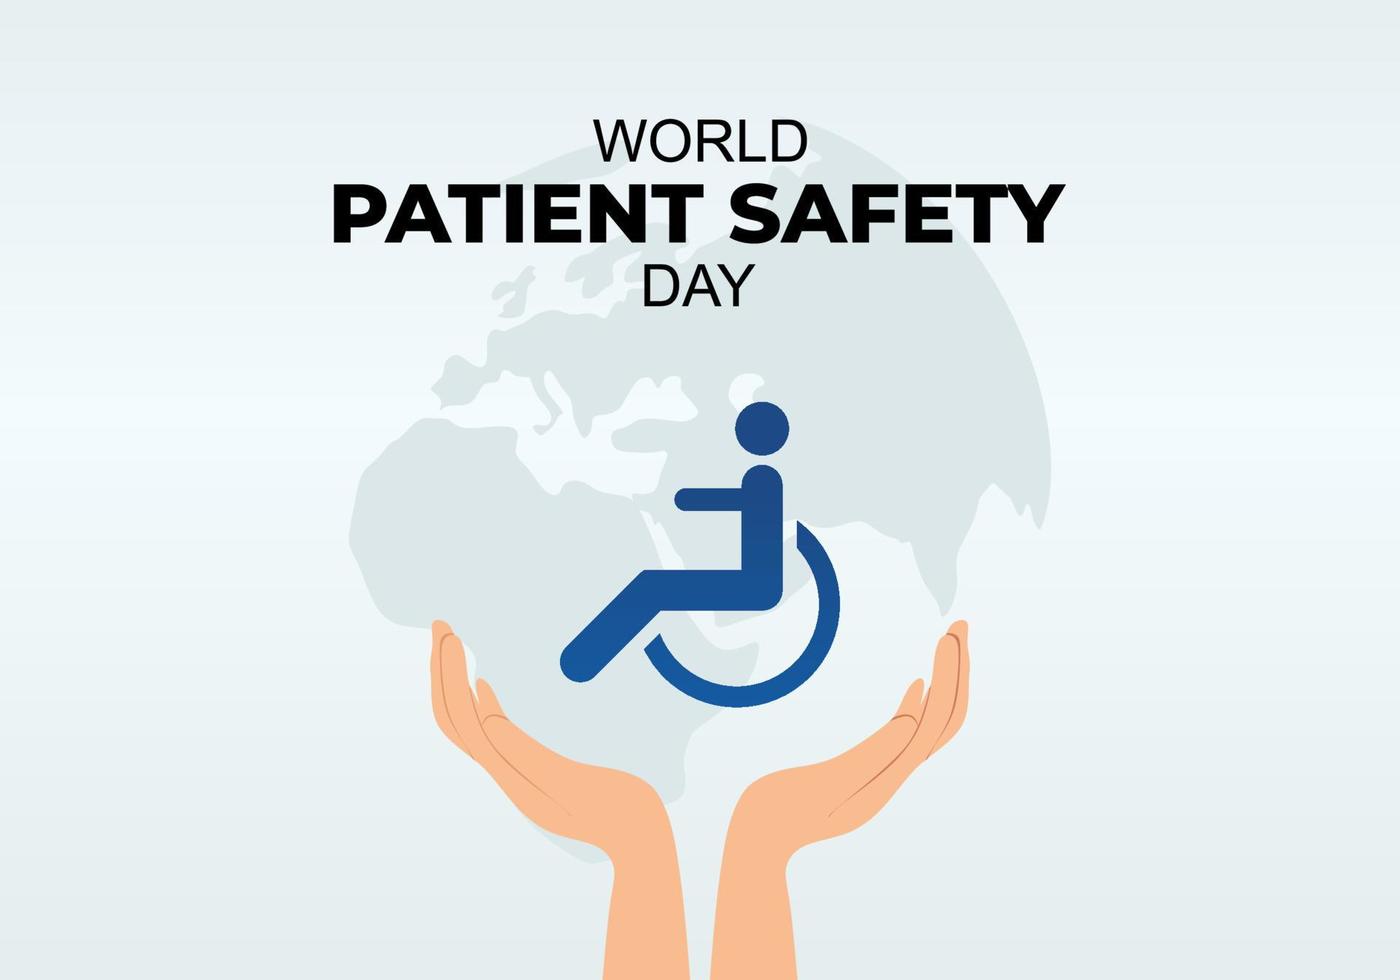 World patient safety day background with safety symbol on september 17 vector